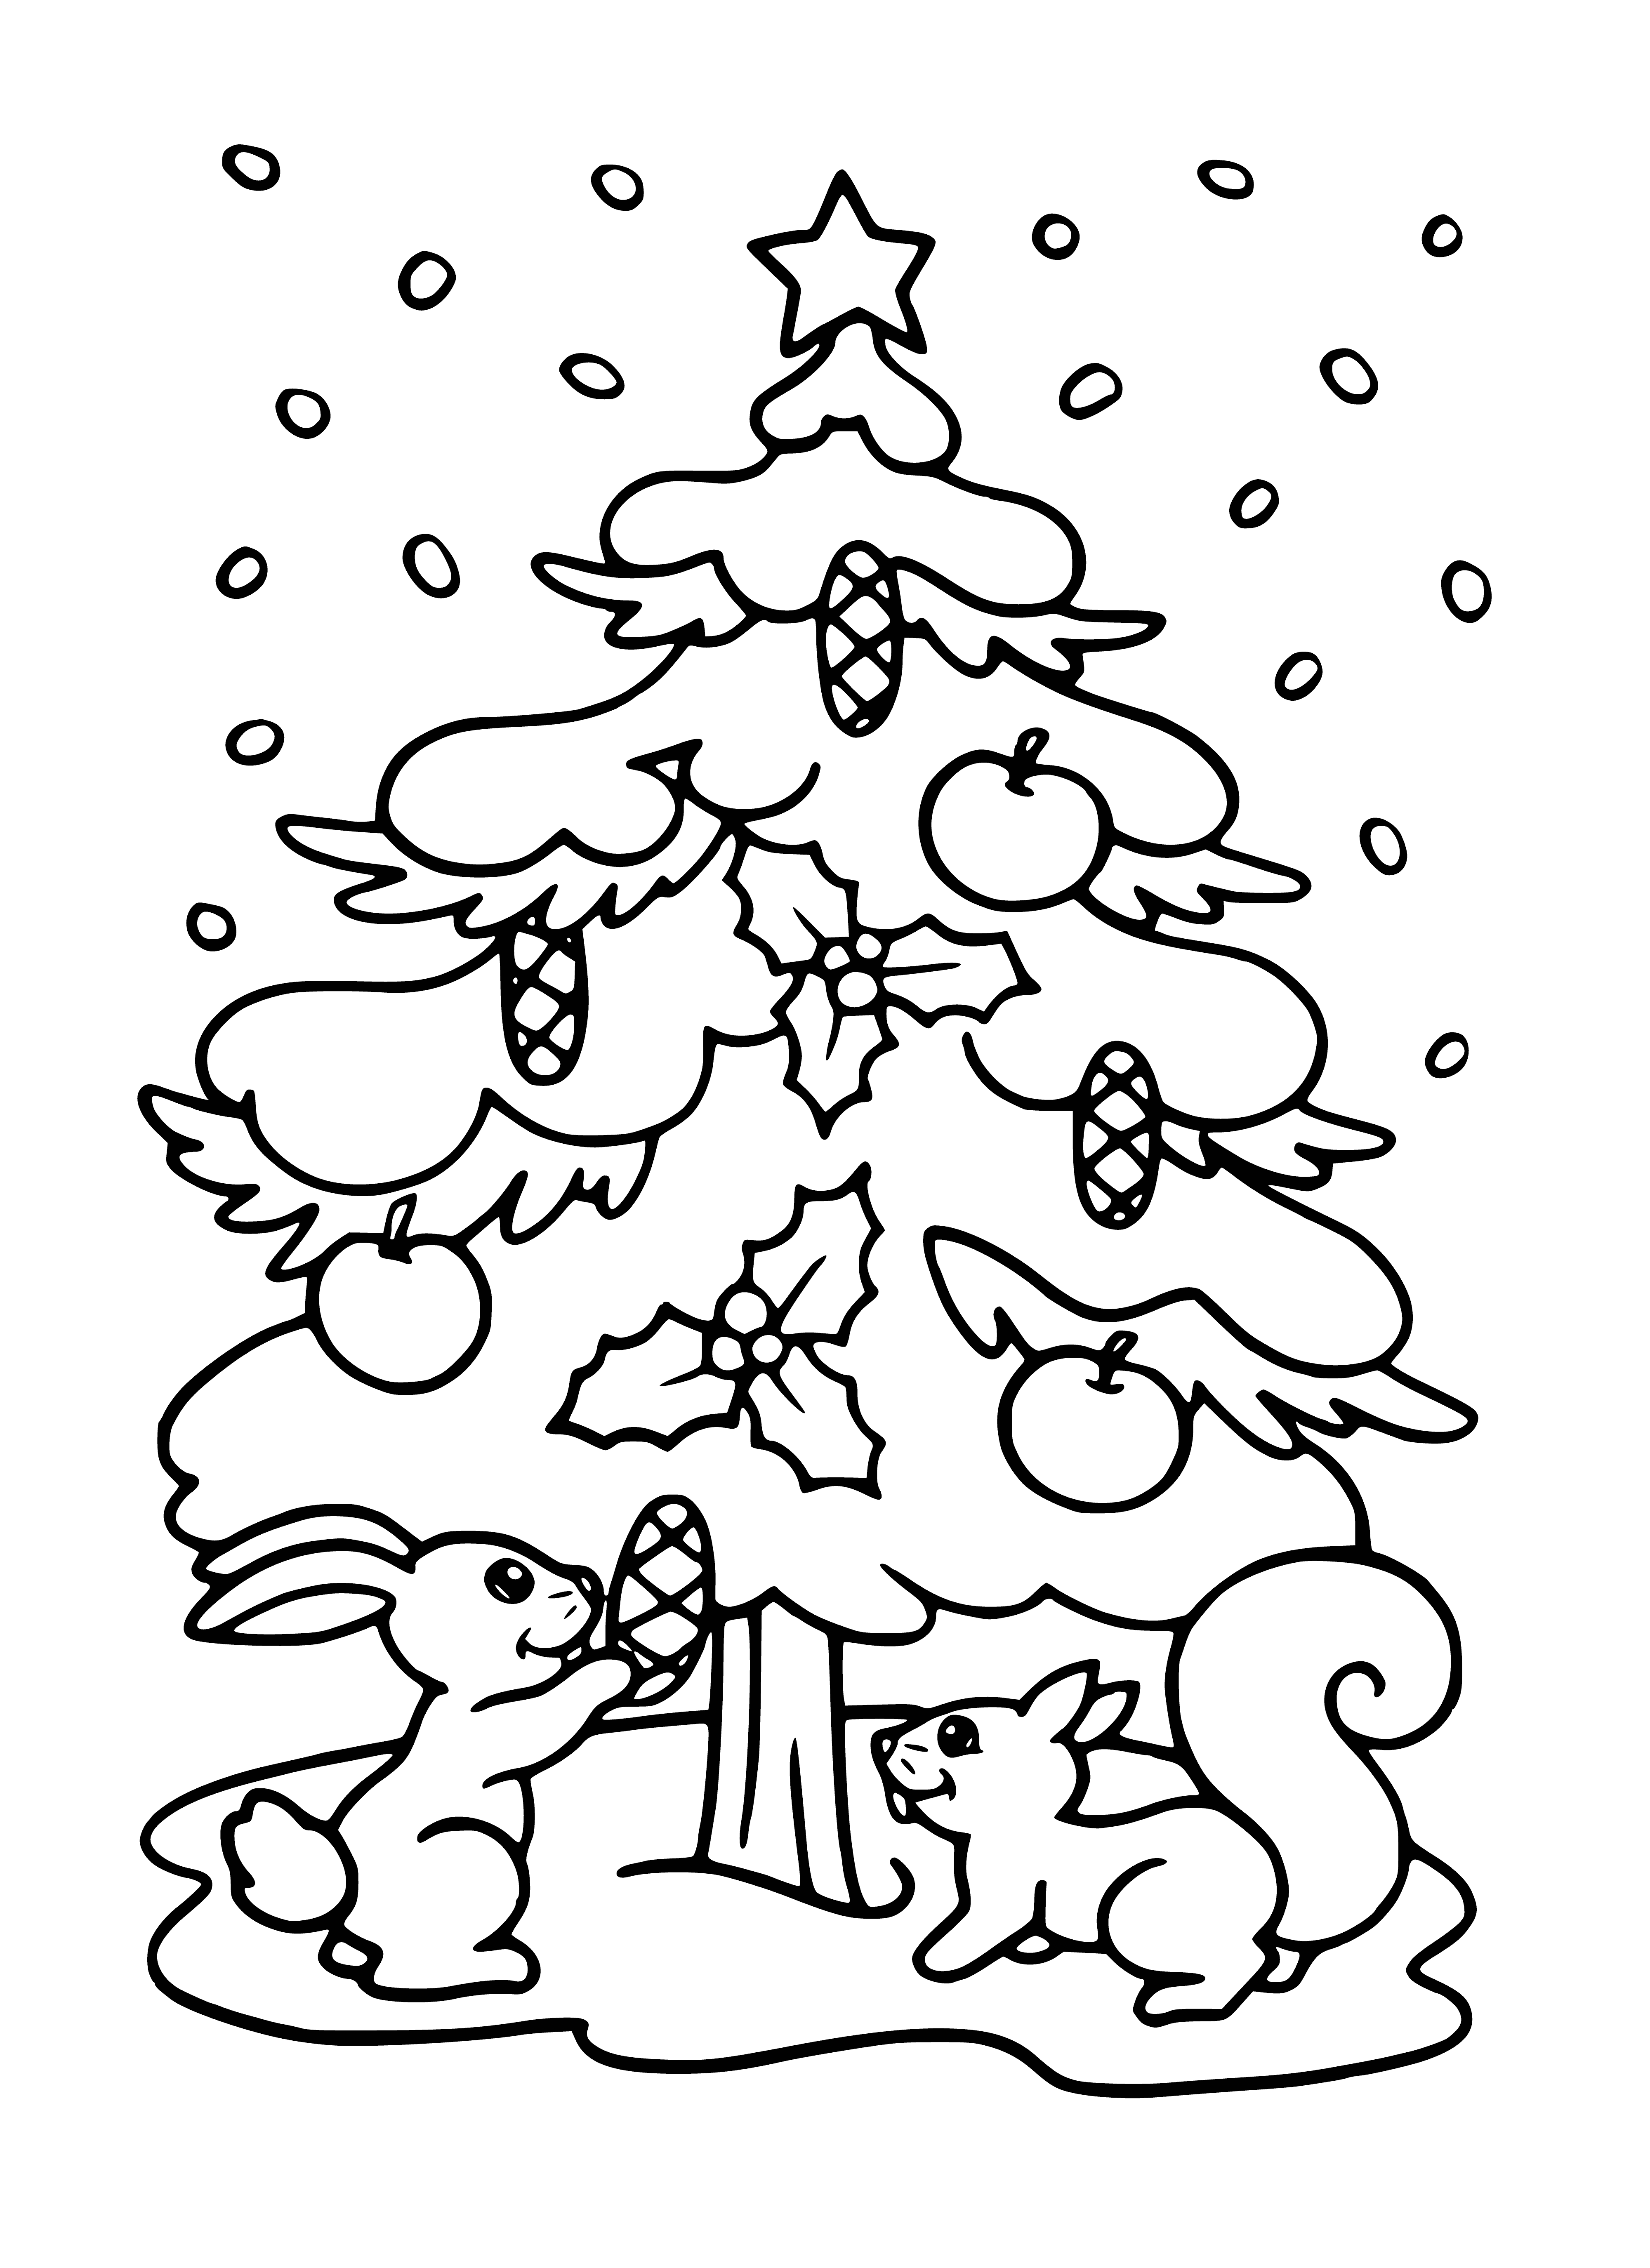 coloring page: Squirrels play around a Christmas tree decorated with lights and ornaments in a festive coloring page.